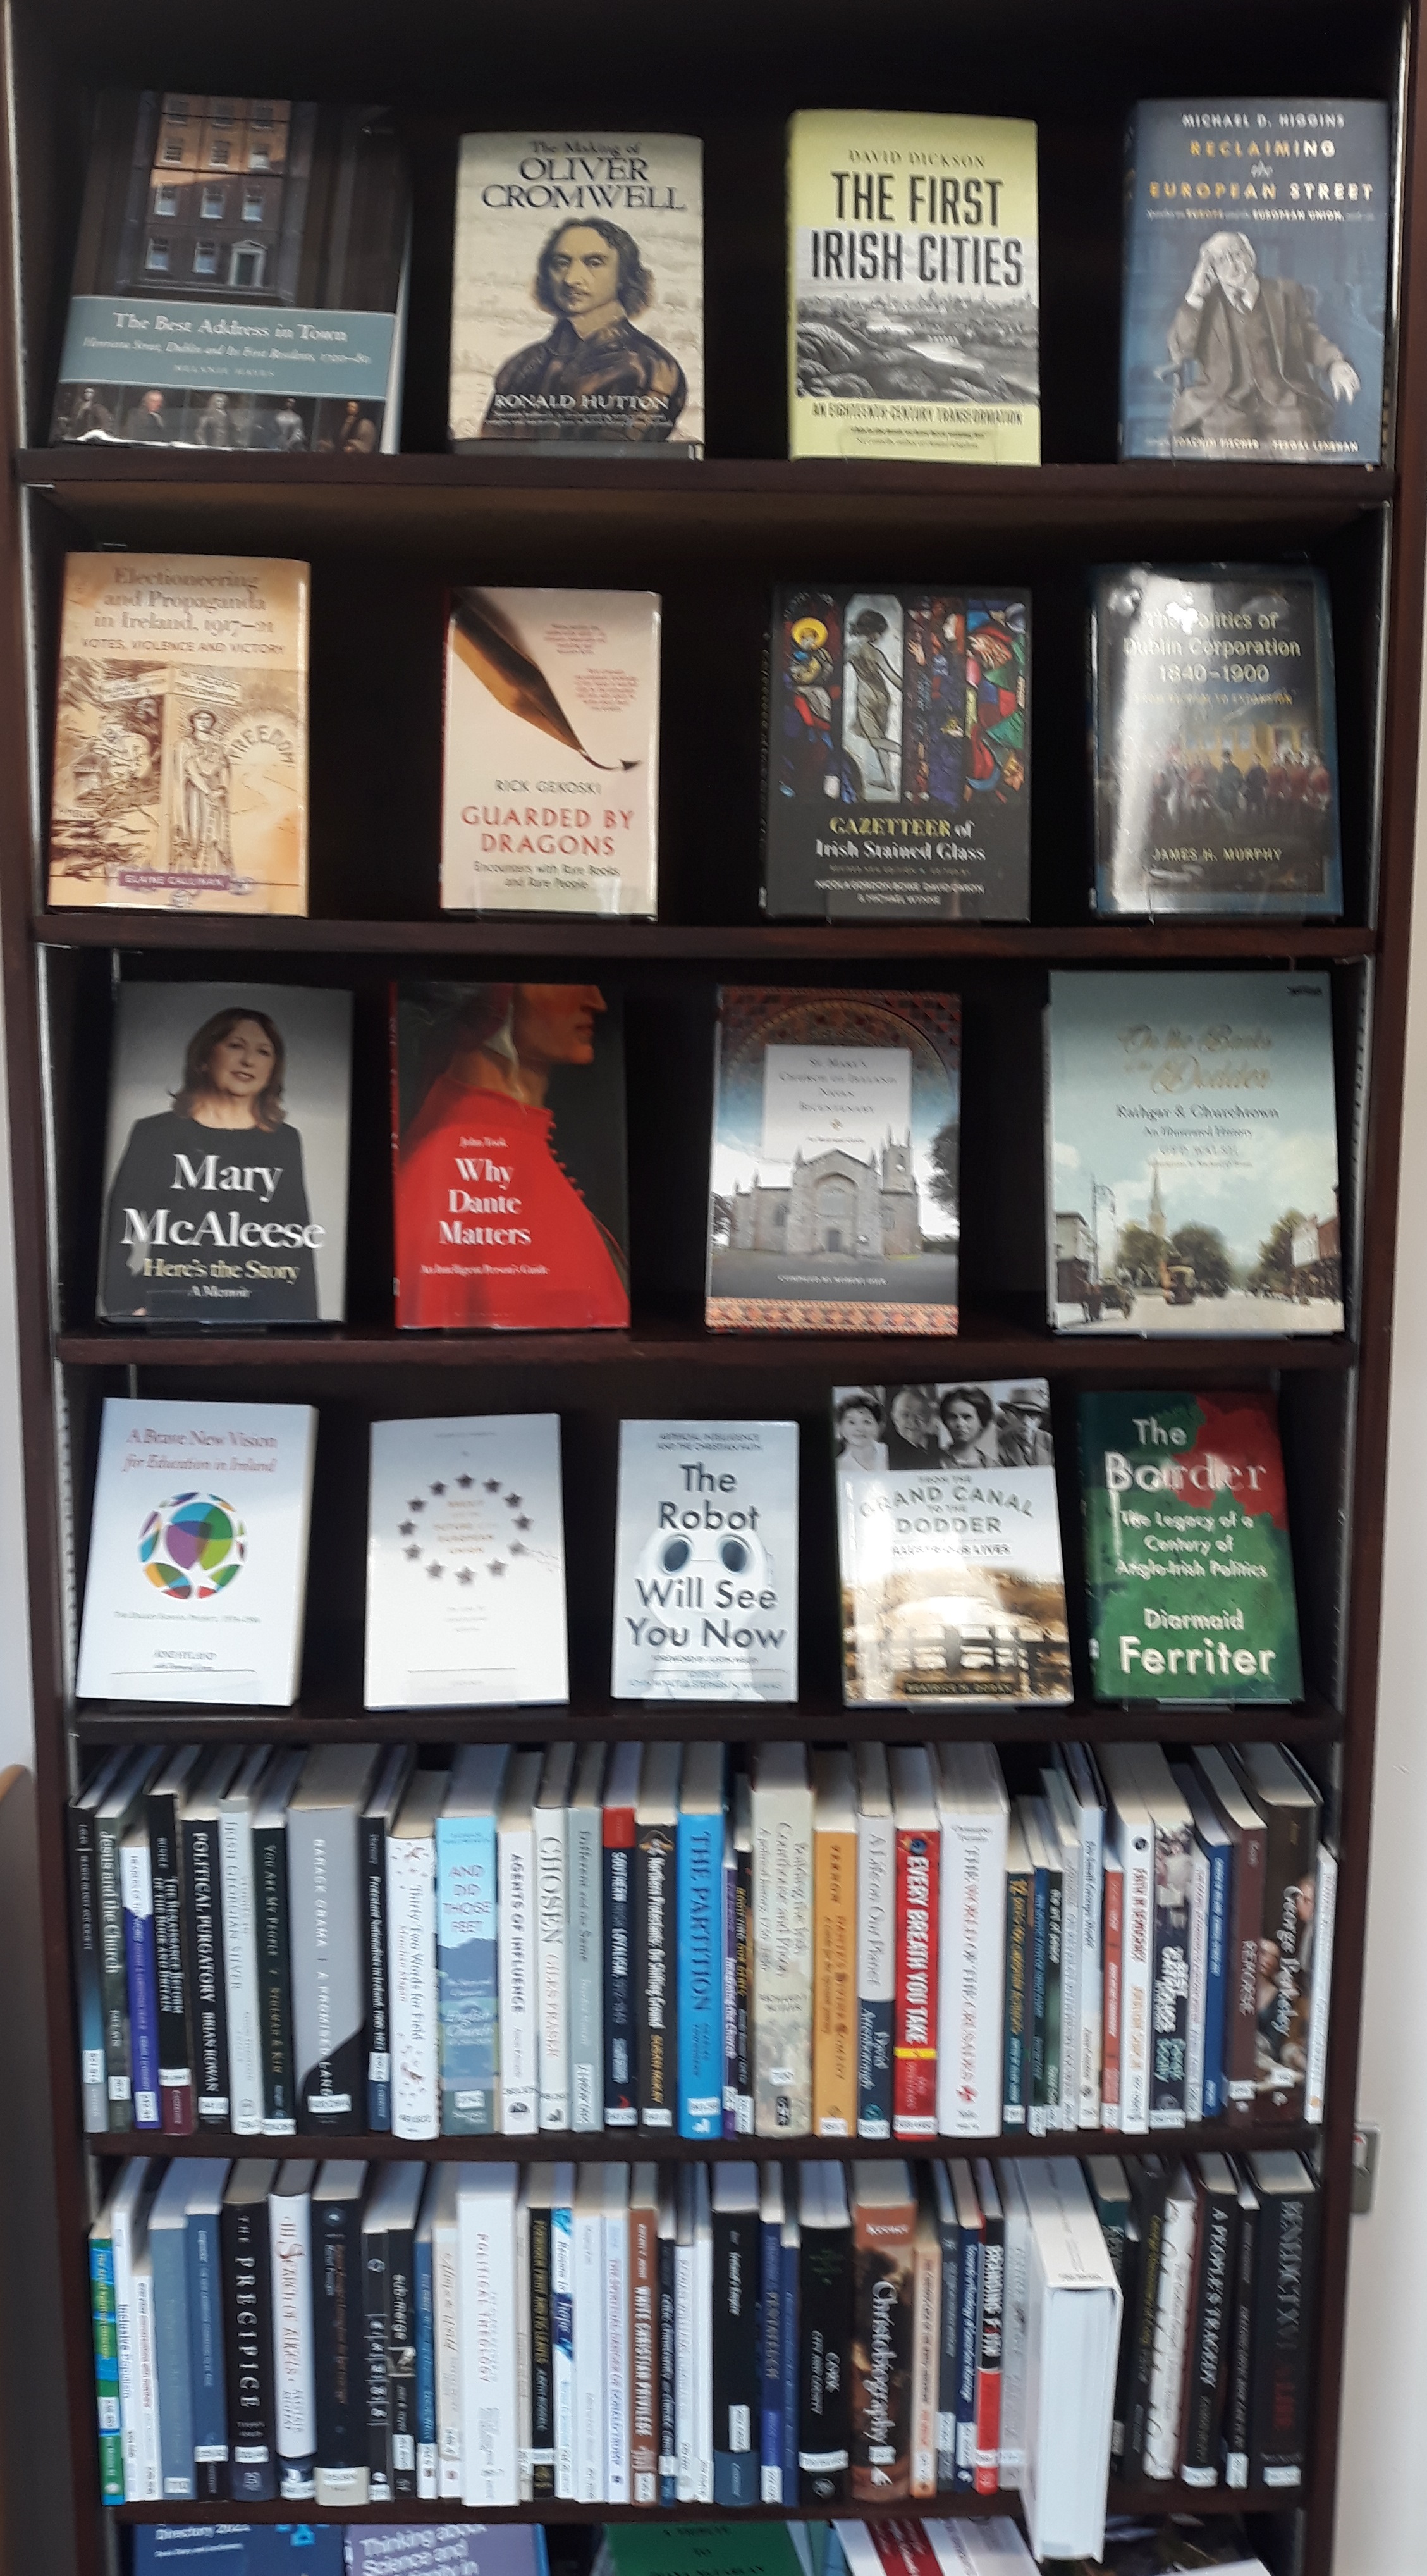 The new books display in the Catalogue Room of the RCB Library.